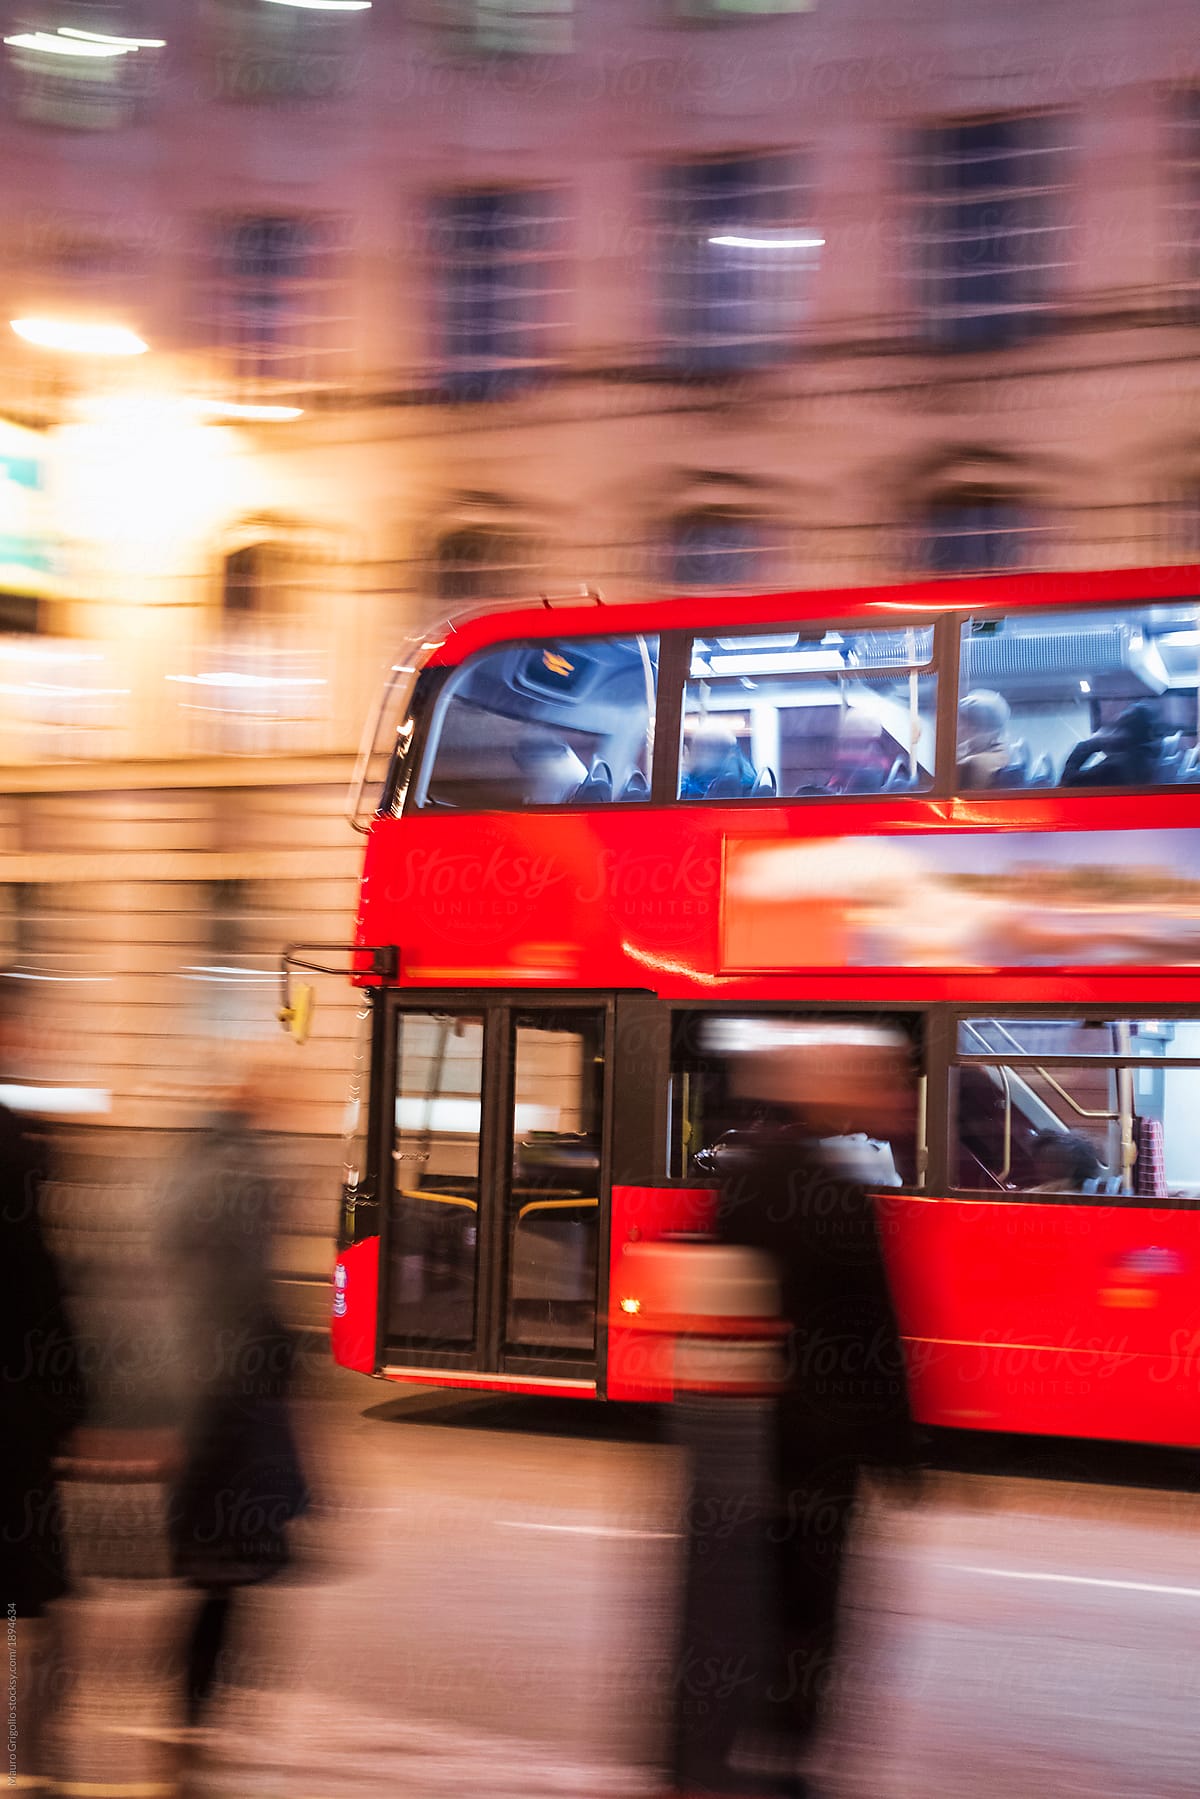 A fast London bus at night